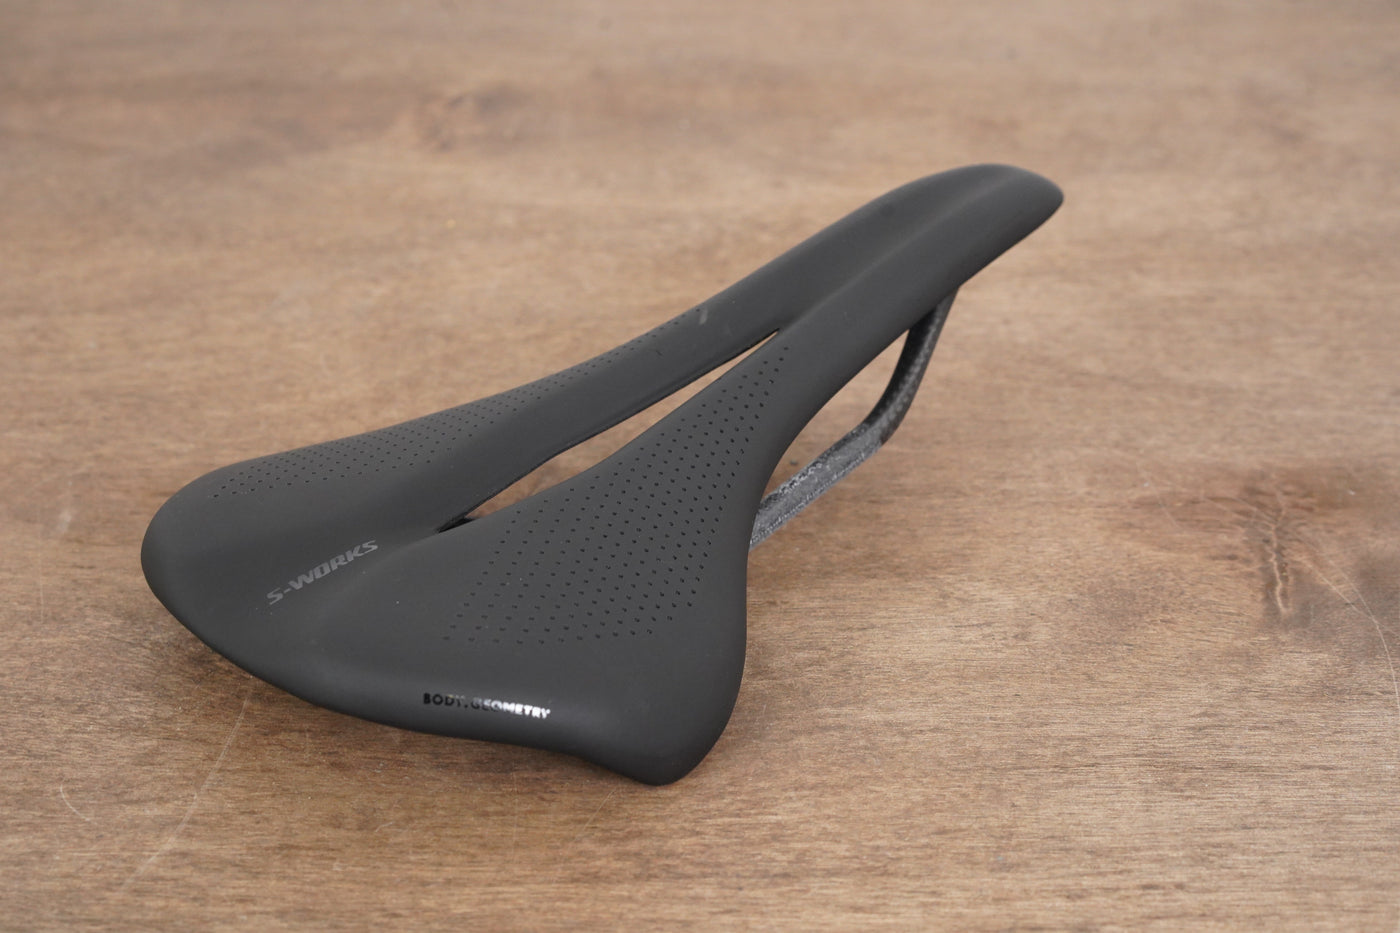 155mm Specialized S-WORKS Phenom Carbon Road Saddle 149g